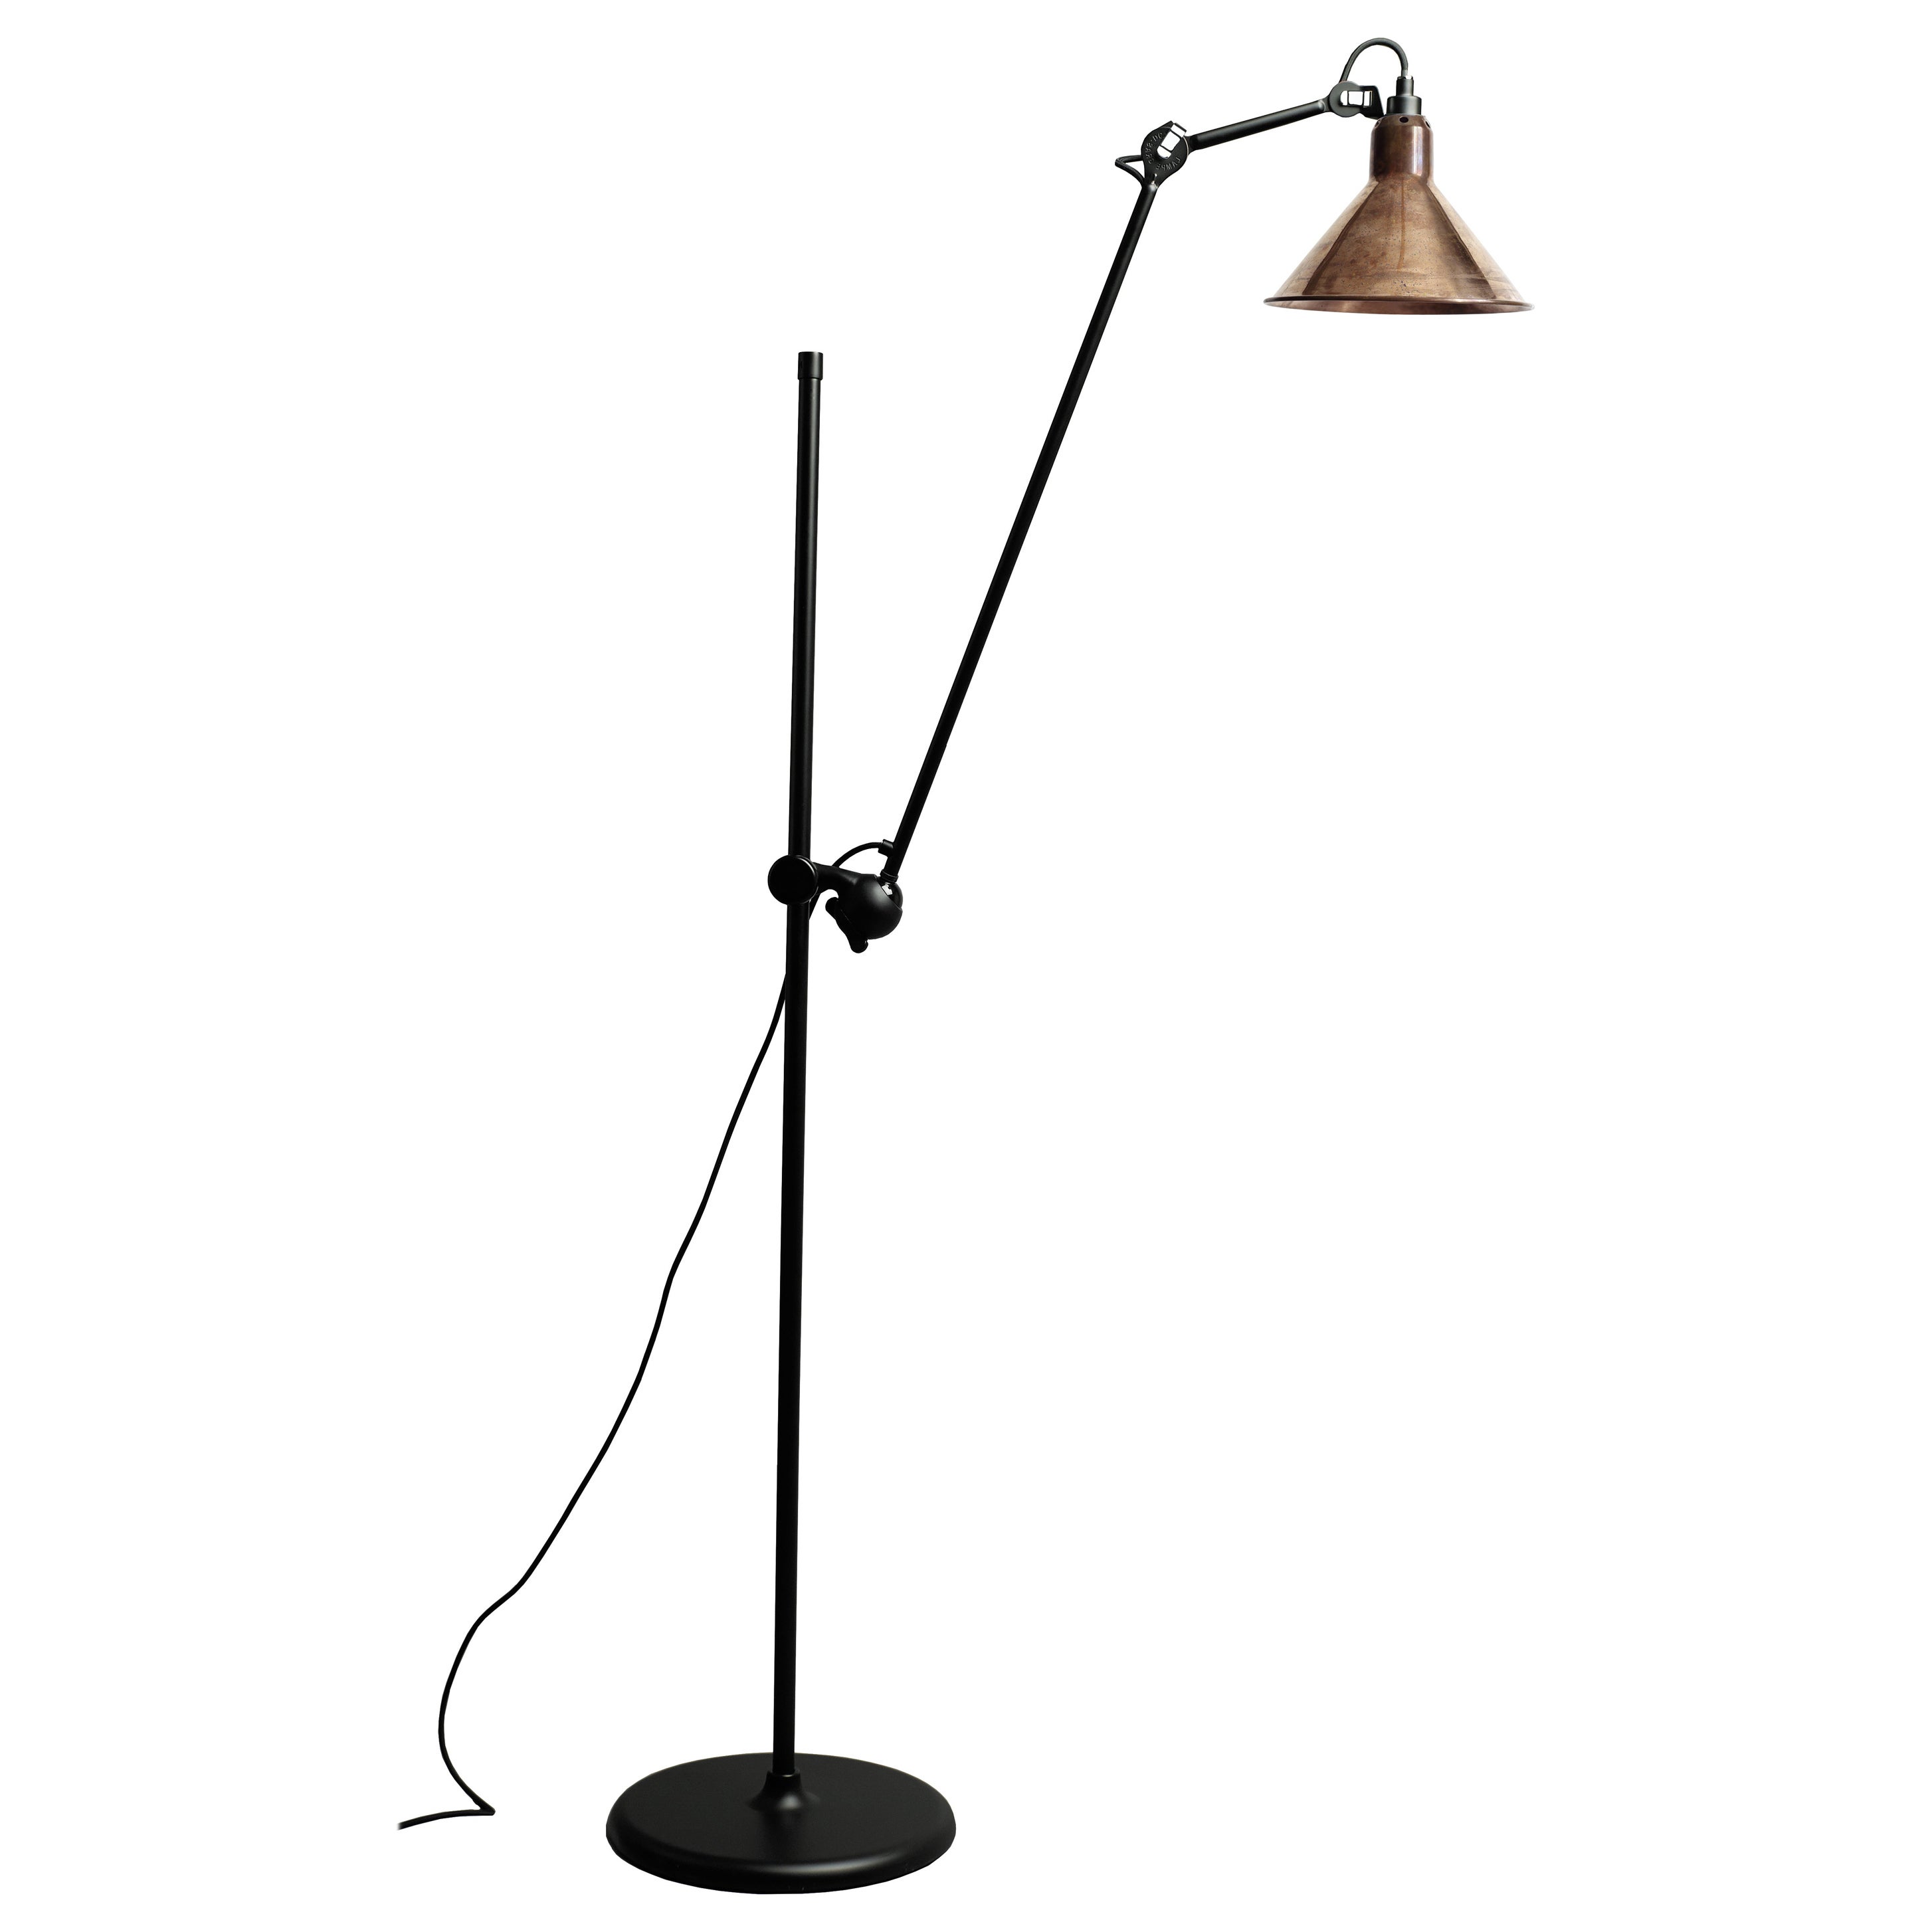 DCW Editions La Lampe Gras N°215 Floor Lamp in Black Arm and Raw Copper Shade For Sale